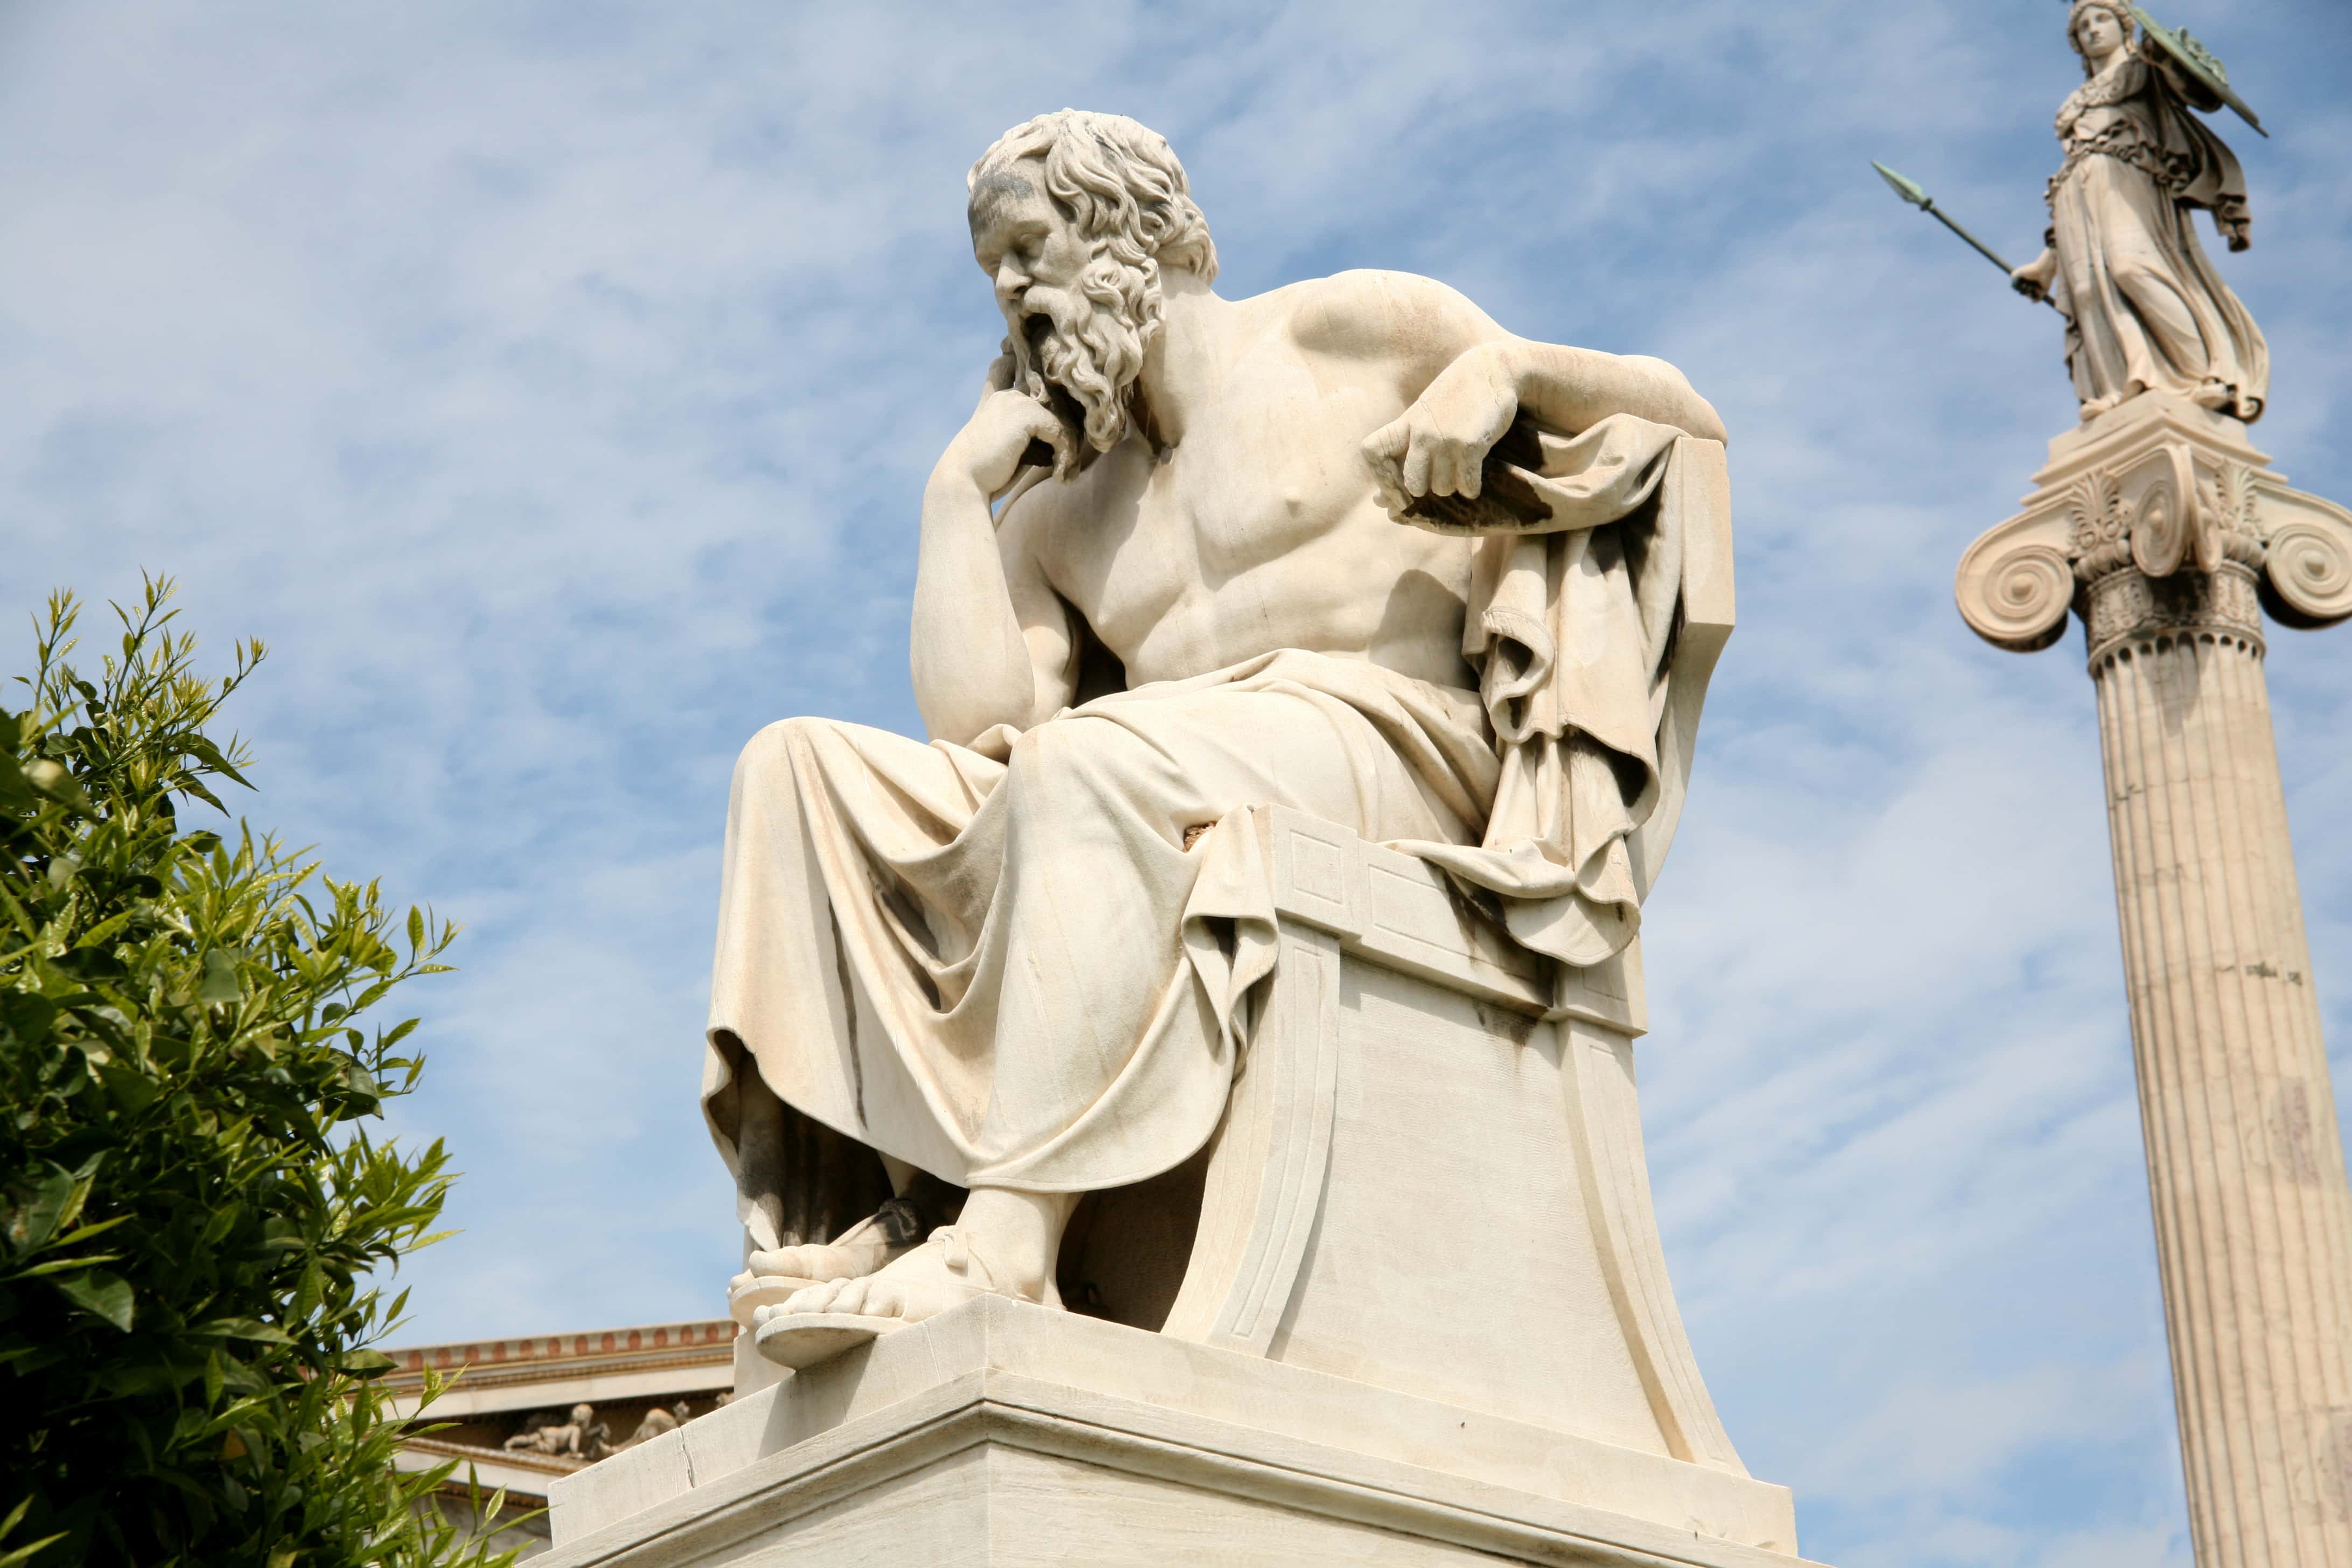 Statue of Socrates, the philosopher, with sky in distance.